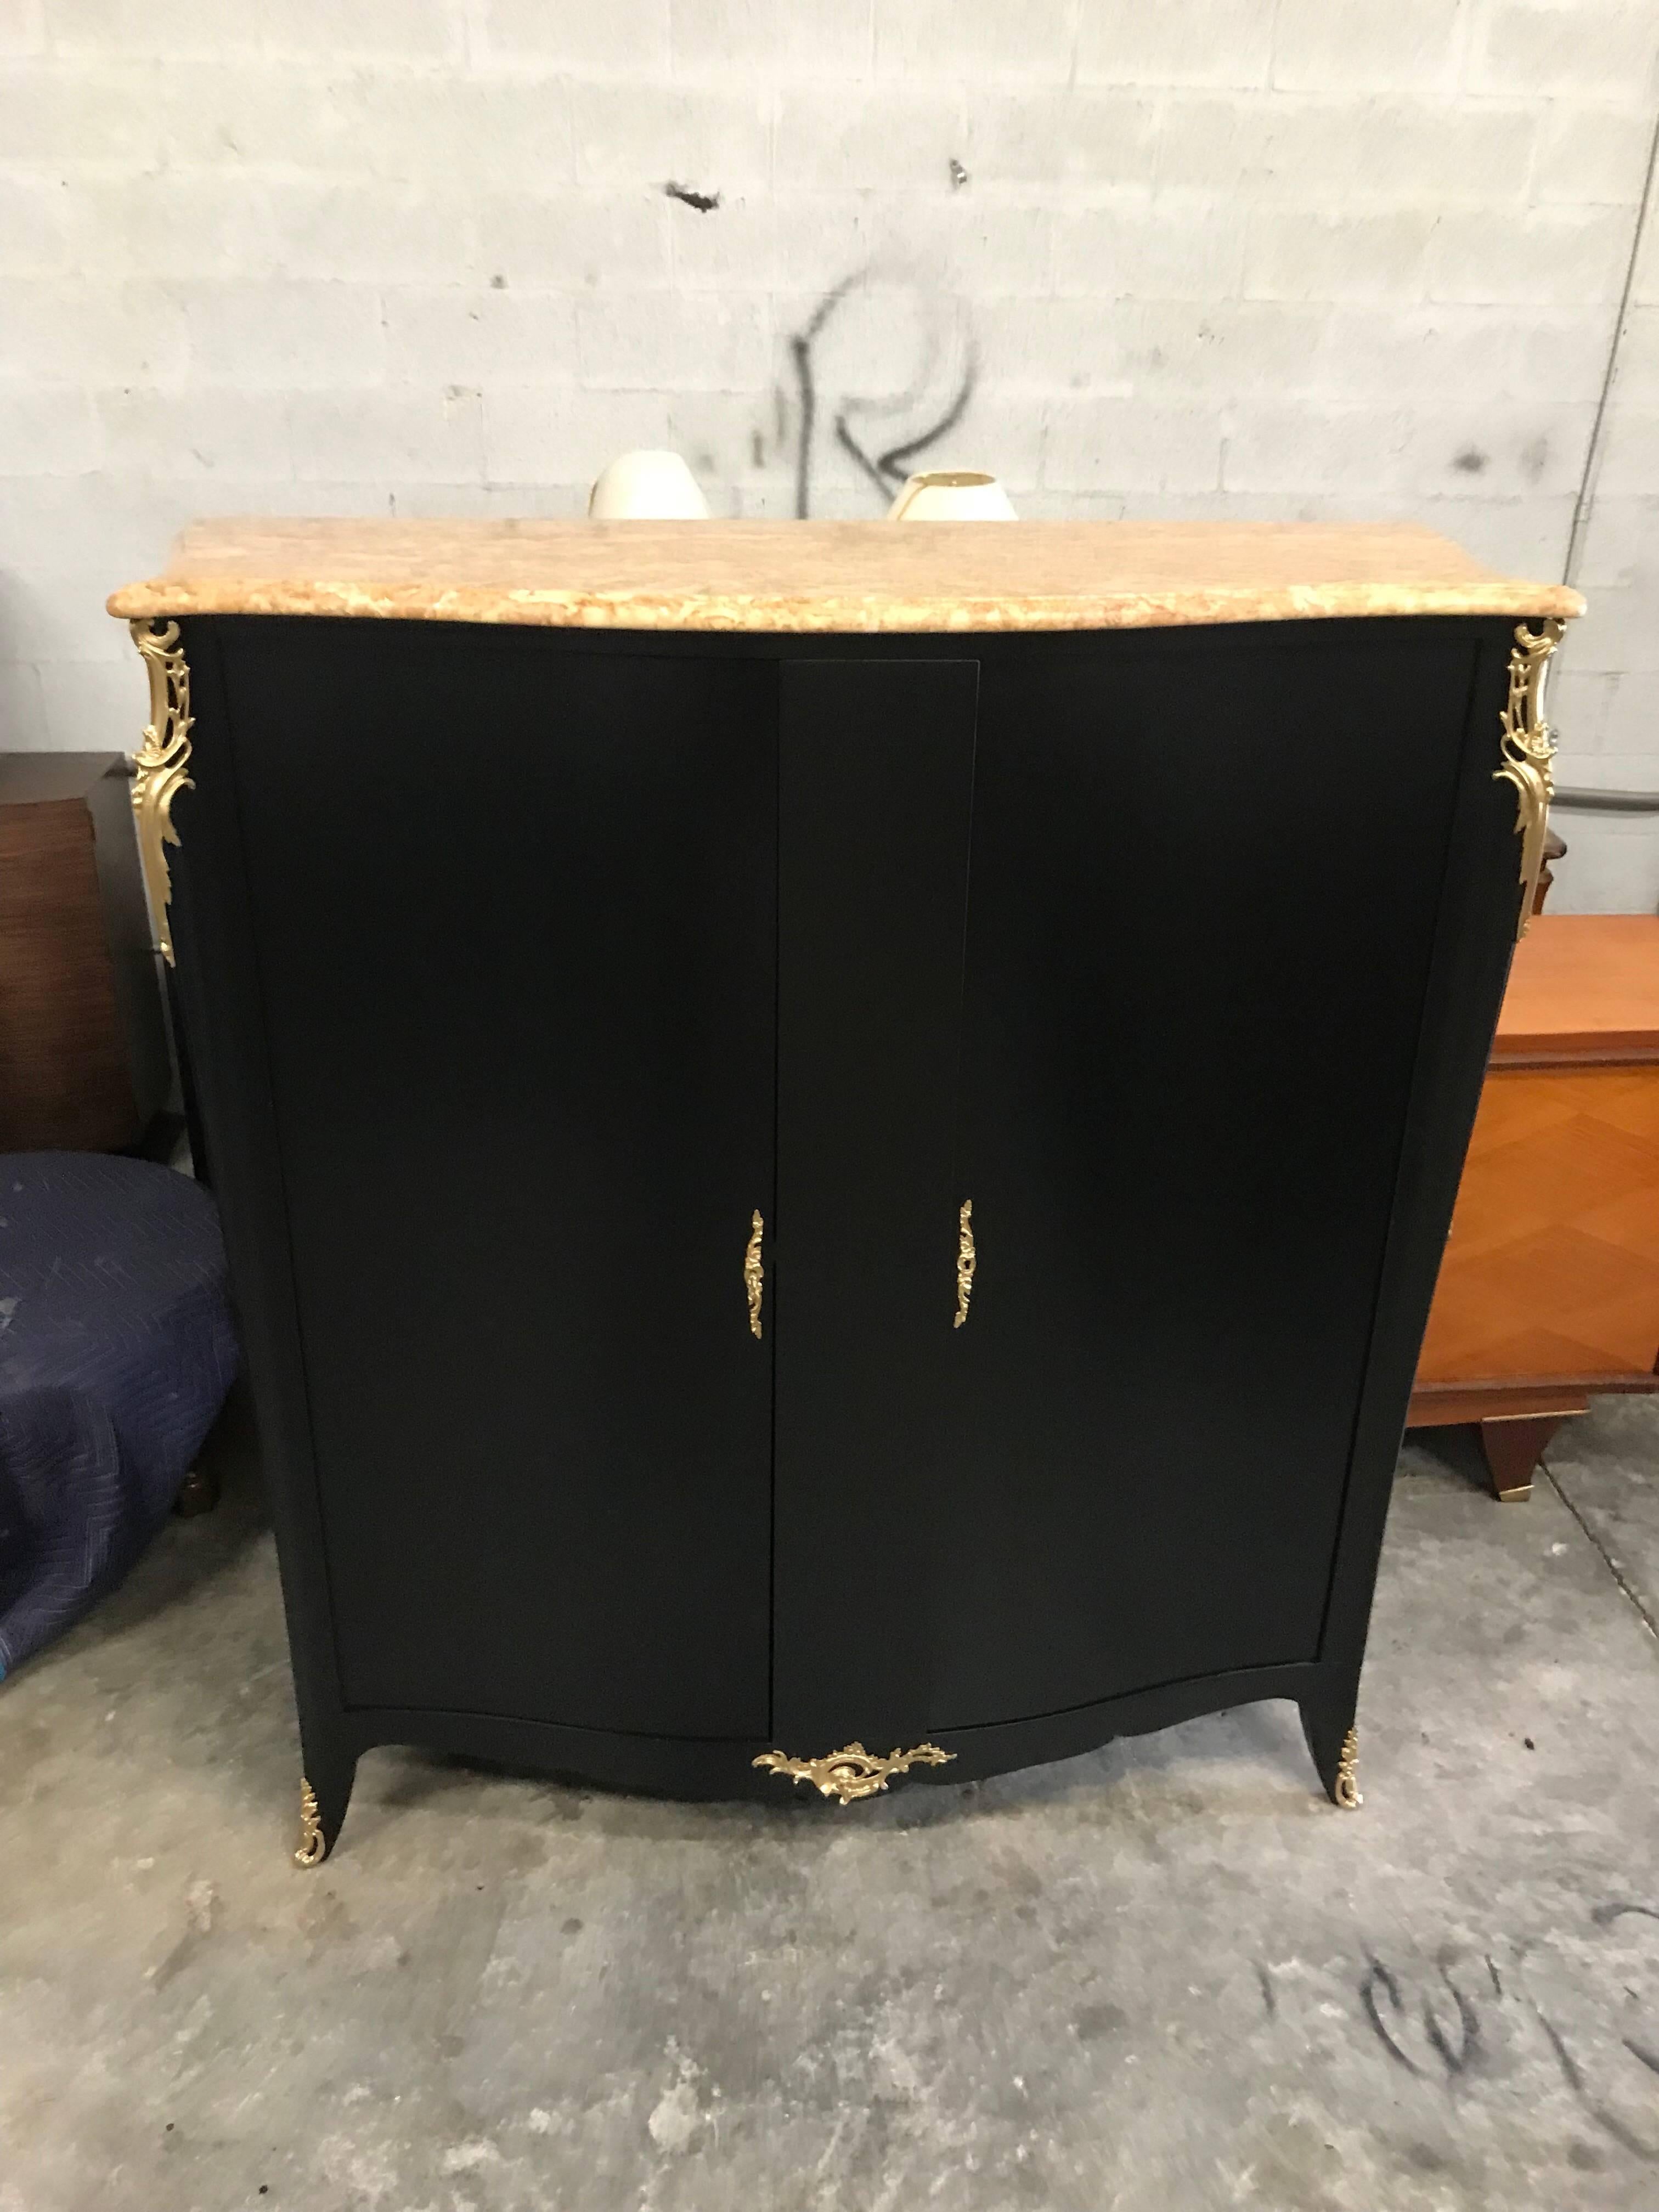 Monumental French Art Deco Ebonized Dry Bar Cabinet with Marble Top, 1940s For Sale 1